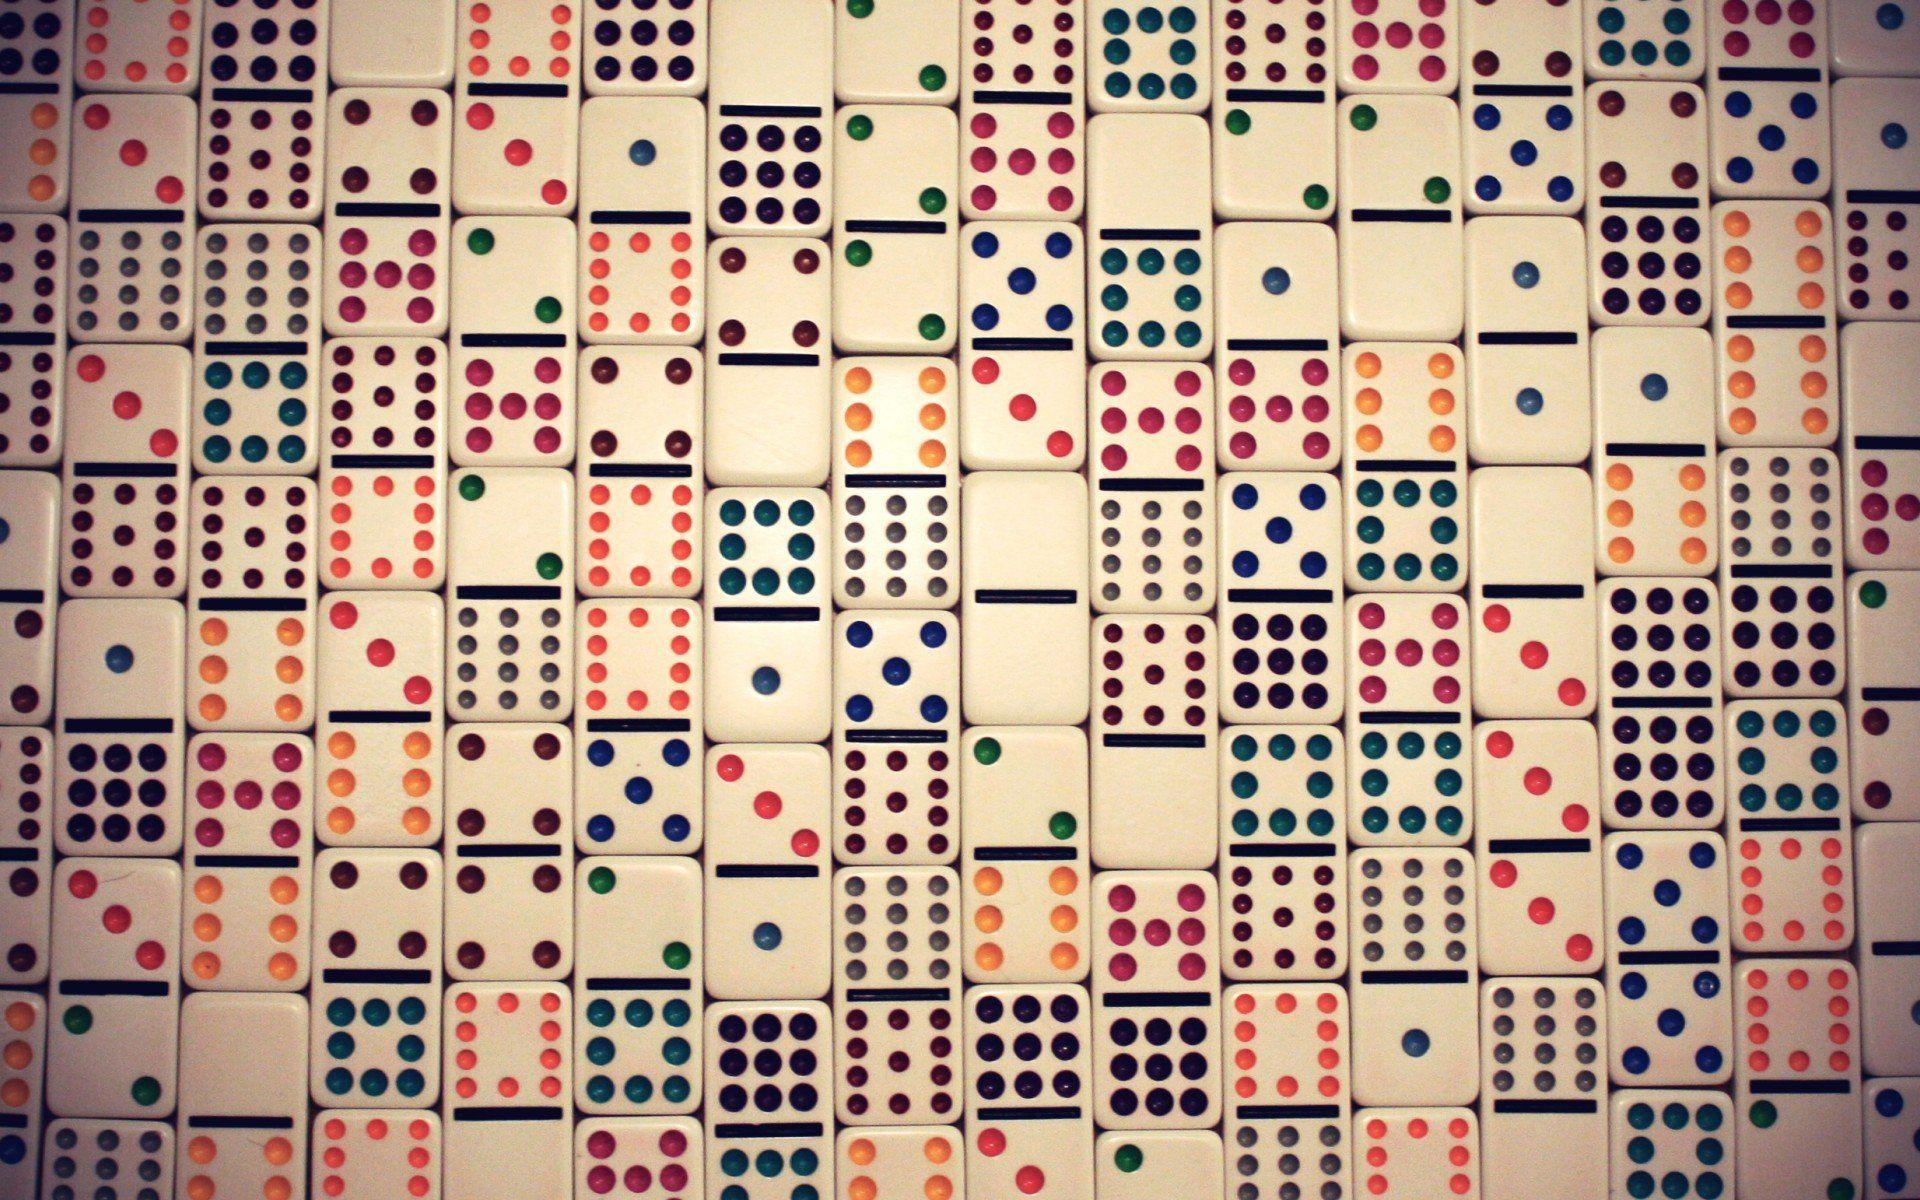 Most Beautiful Collection: Dominoes Wallpaper, HQFX Dominoes